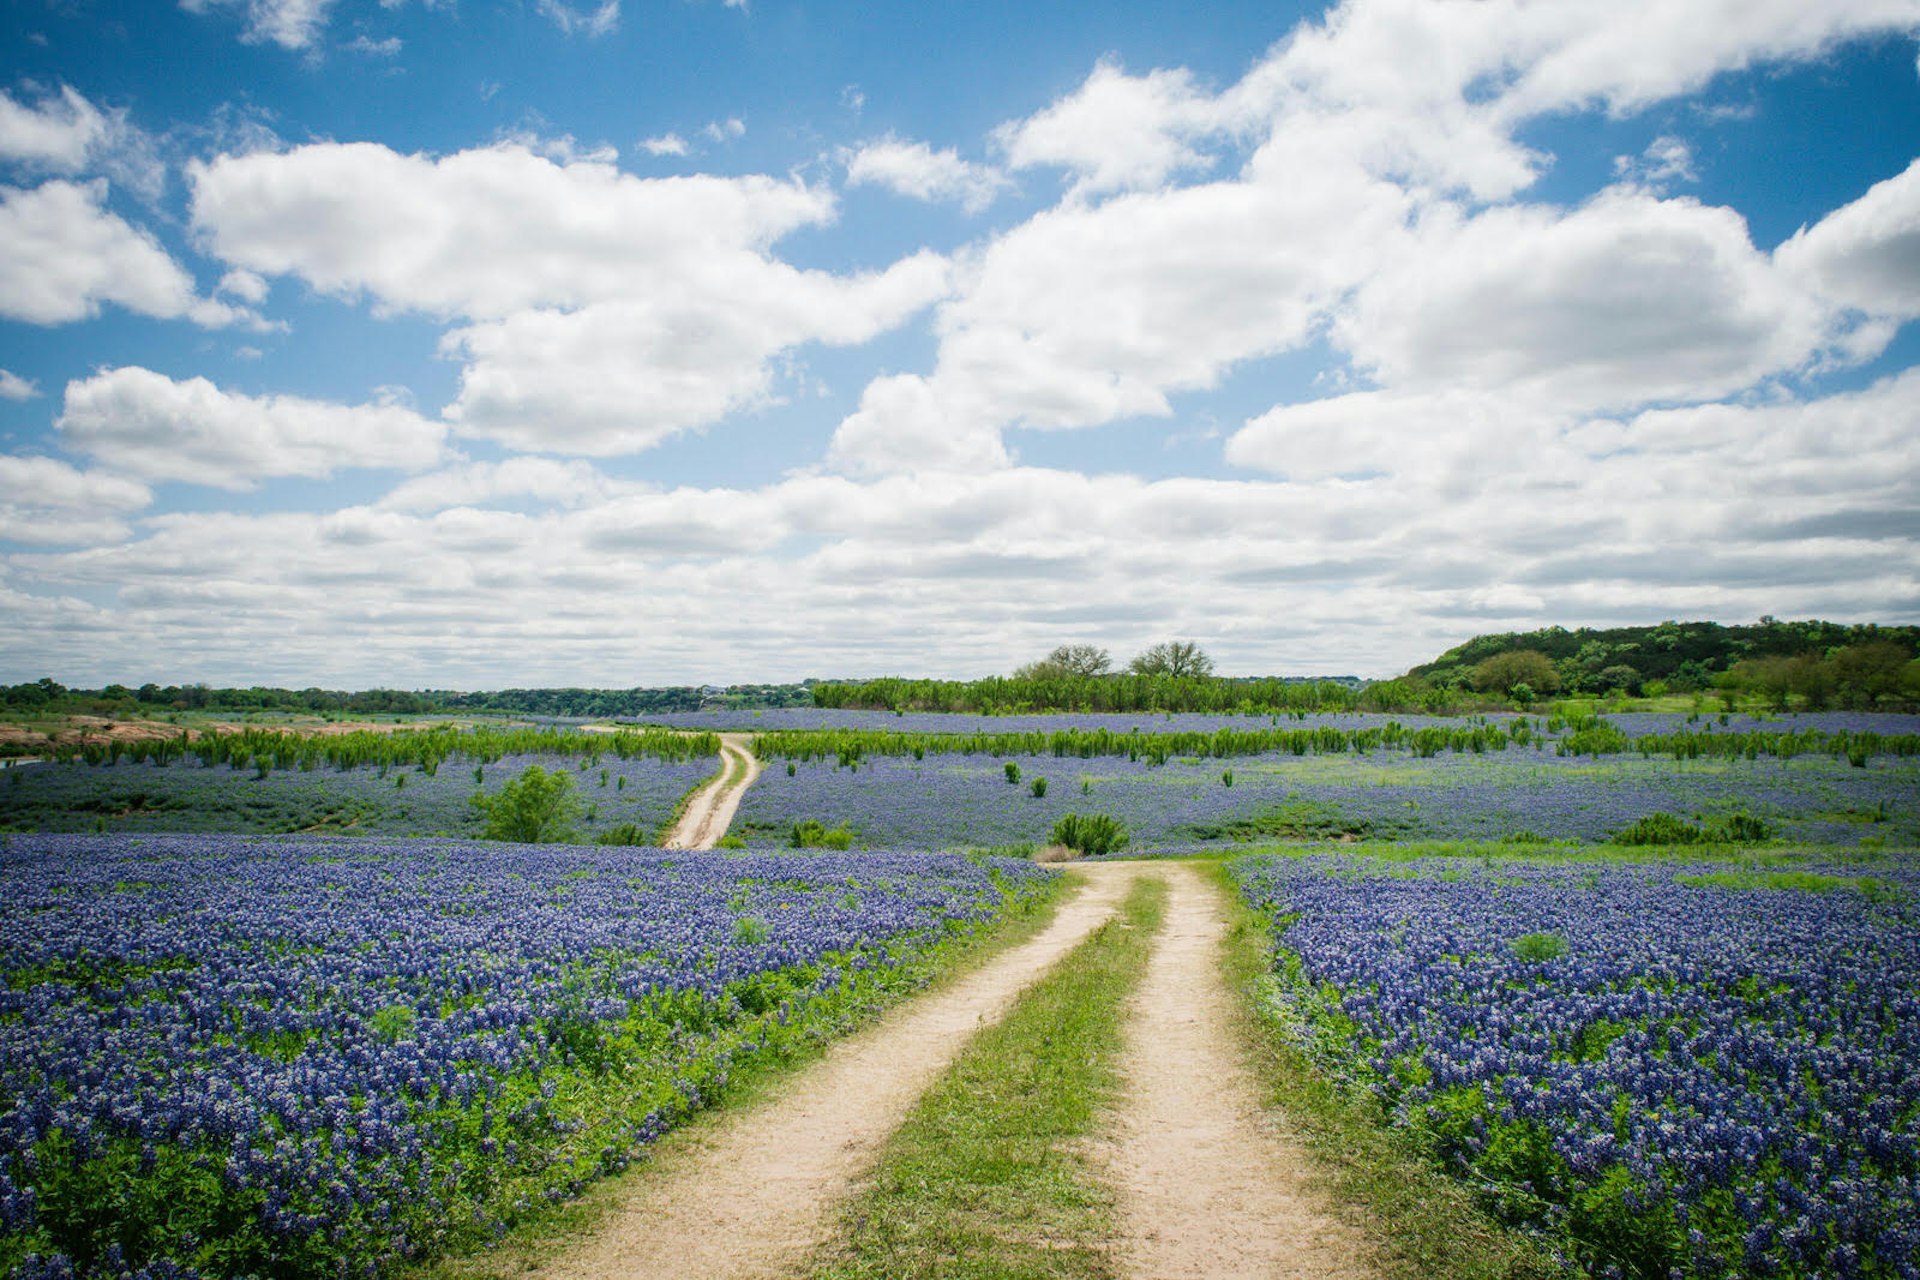 Texas Hill Country bluebonnets blooming in spring © E_Cotner / iStock / Getty